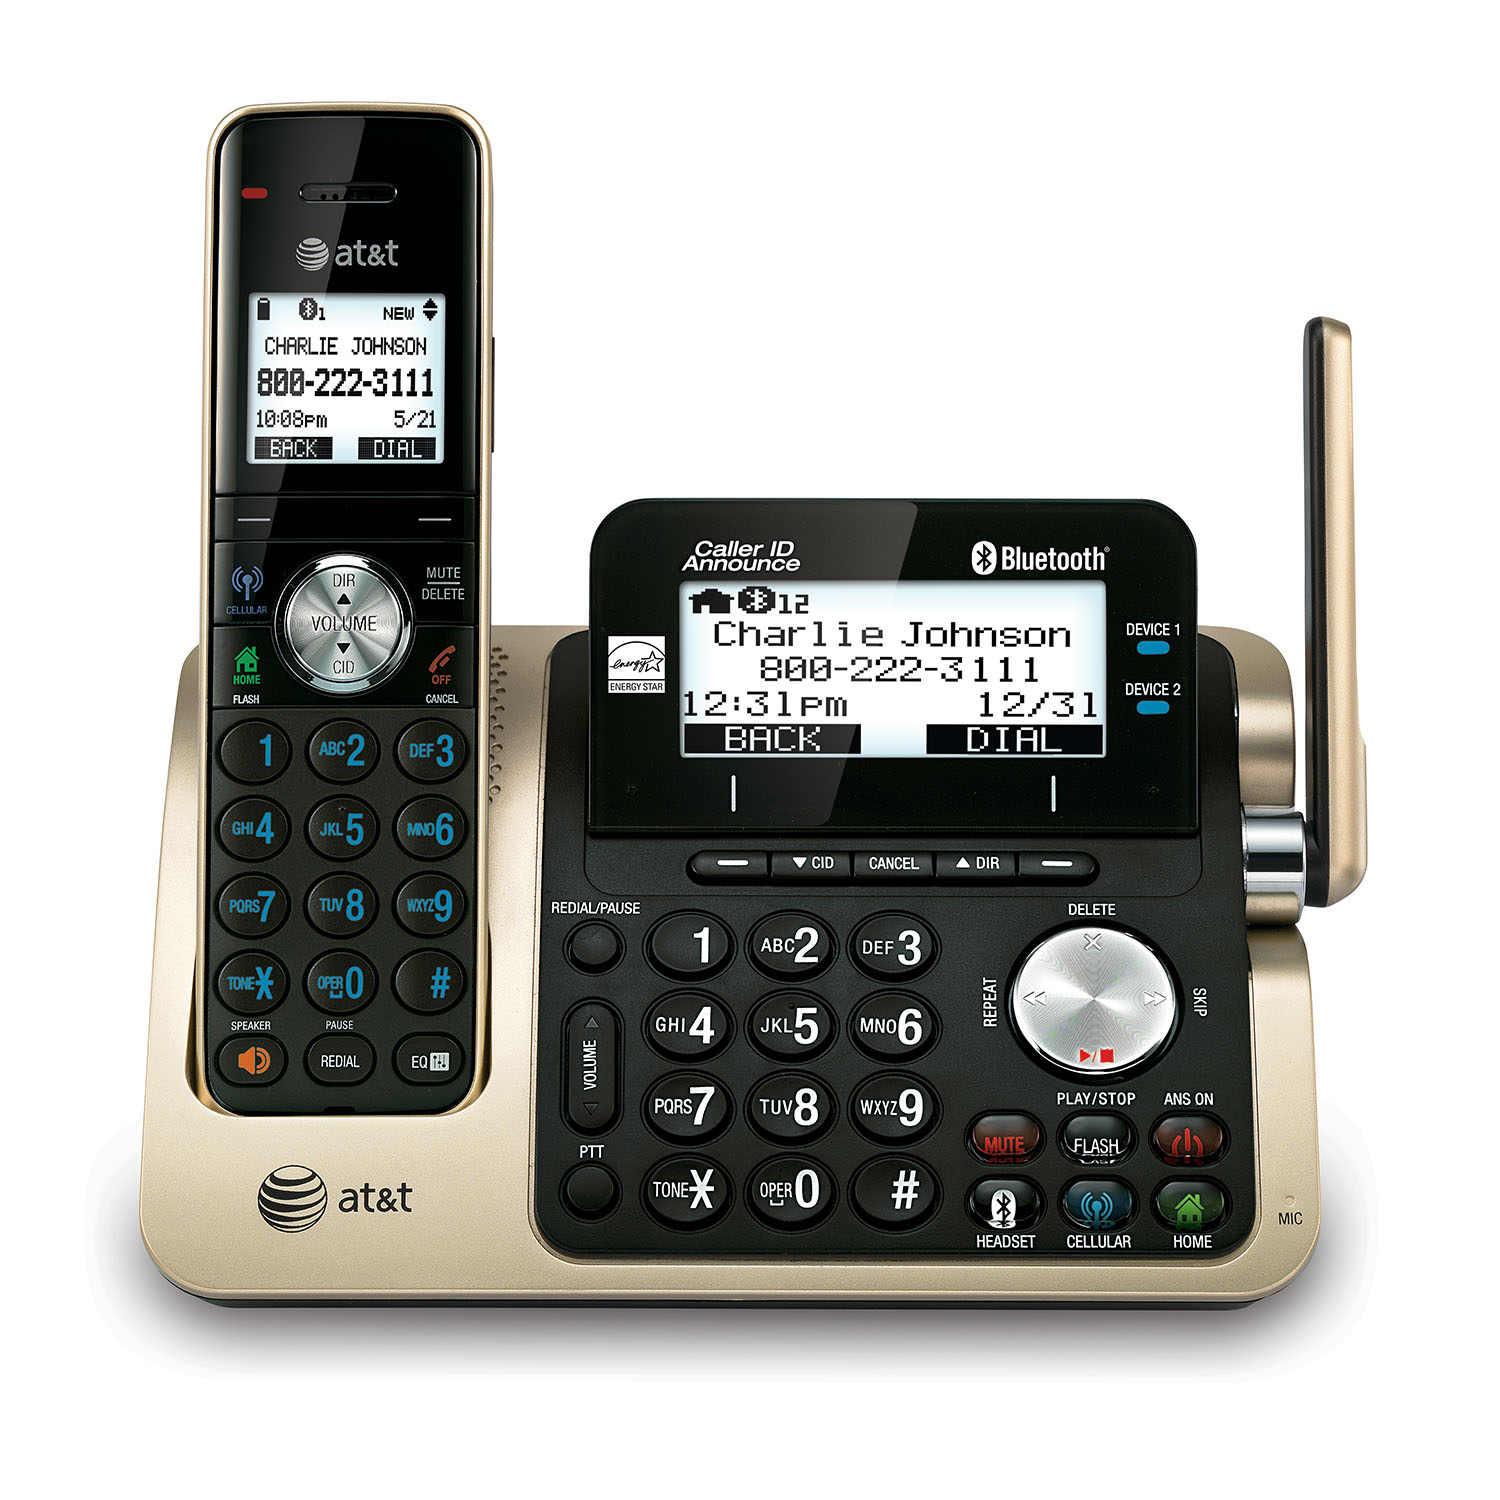 XL Tilt Display XL Buttons & Audio Assist Volume Boost AT&T CL2940 Corded Phone with Caller ID/Call waiting Speakerphone 